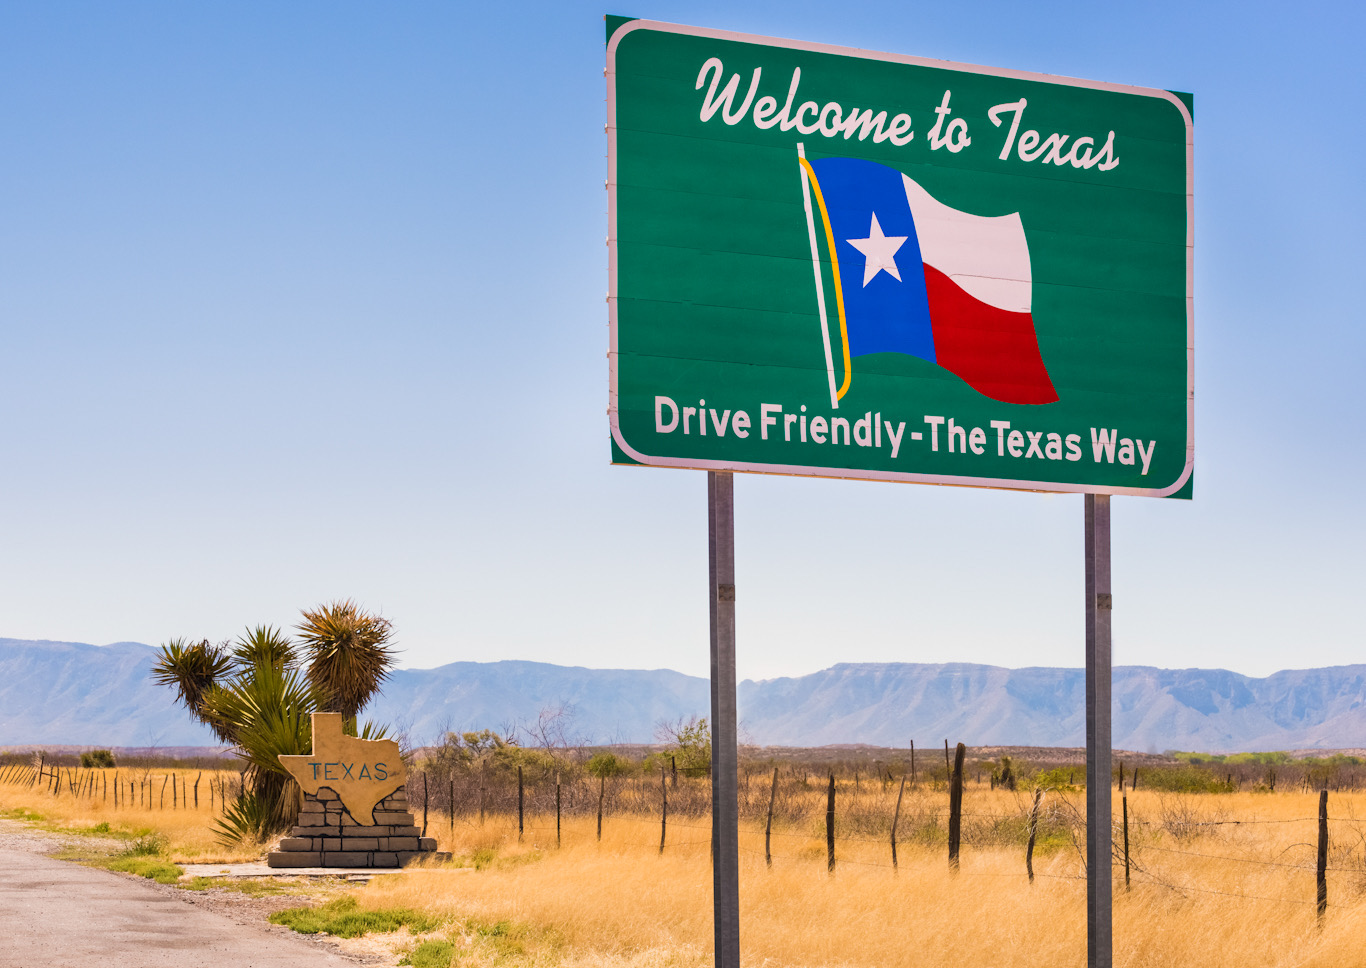 Road sign on highway welcoming people to Texas